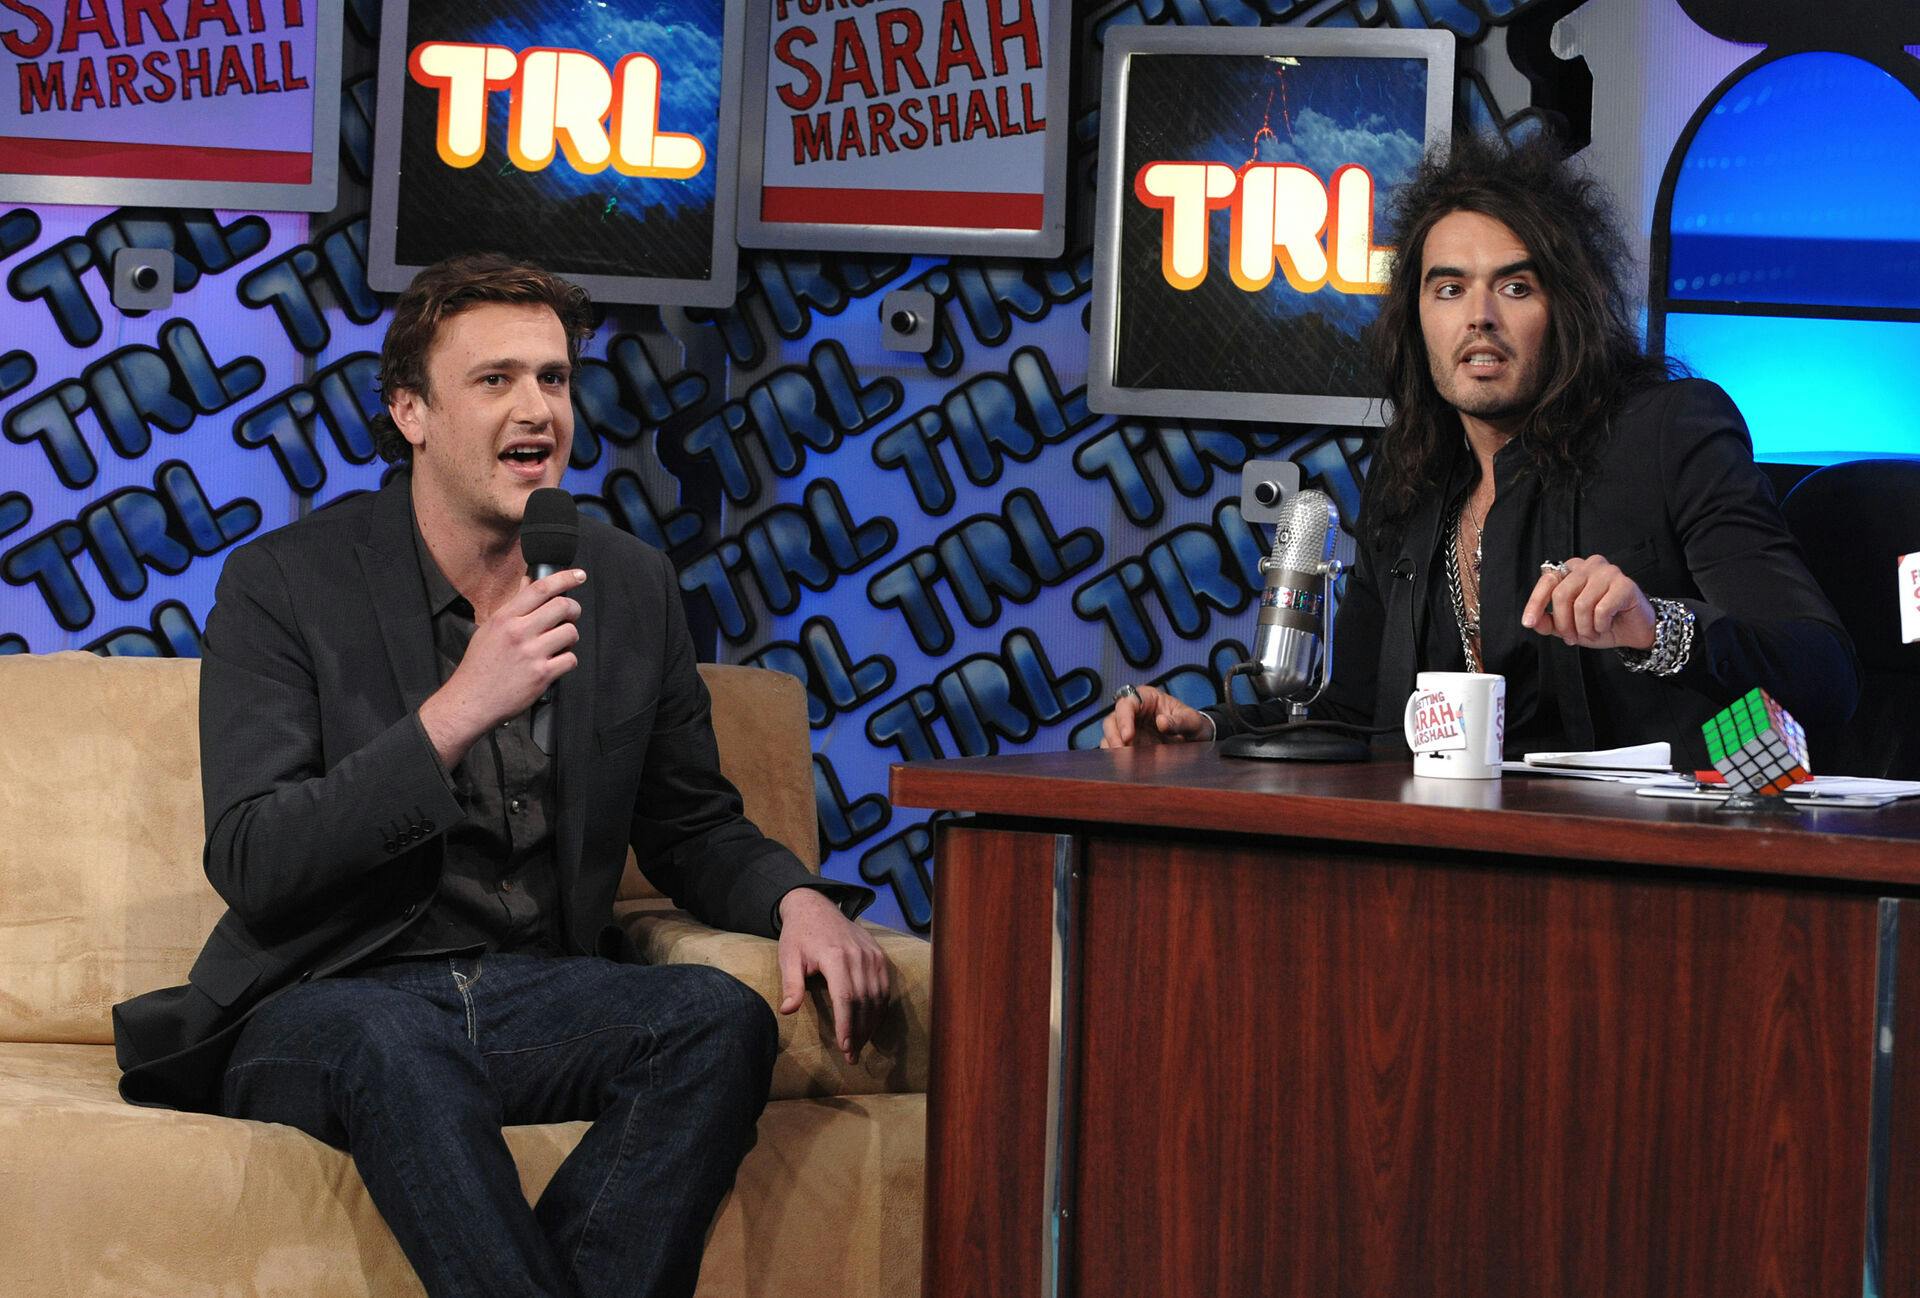 Actors Jason Segel, left, and Russell Brand make an appearance at MTV Studio's in Times Square for MTV's "Total Request Live" show on Tuesday, April 15, 2008, in New York. (AP Photo/Peter Kramer)